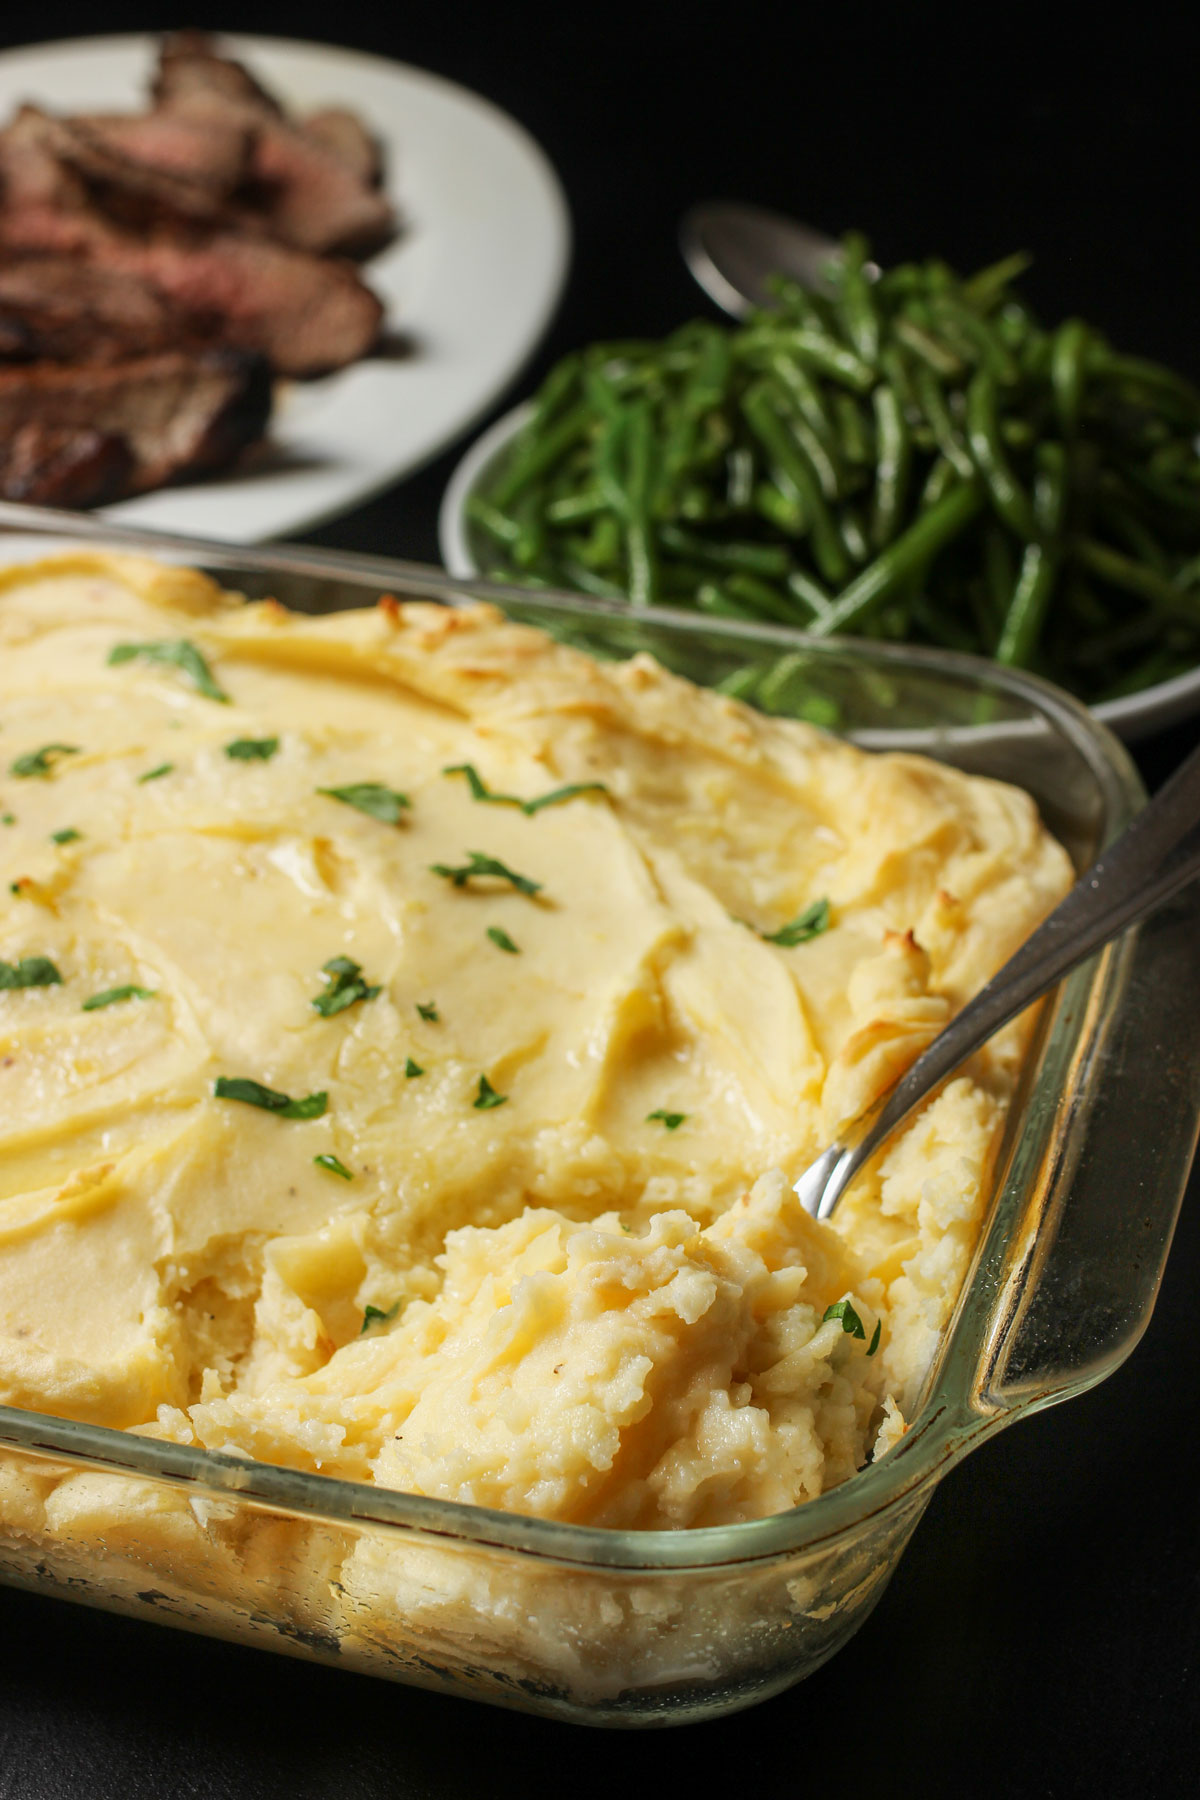 baked mashed potato casserole topped with chopped fresh parsley on dinner table next to bowl of green beans and a platter of sliced tri-tip.